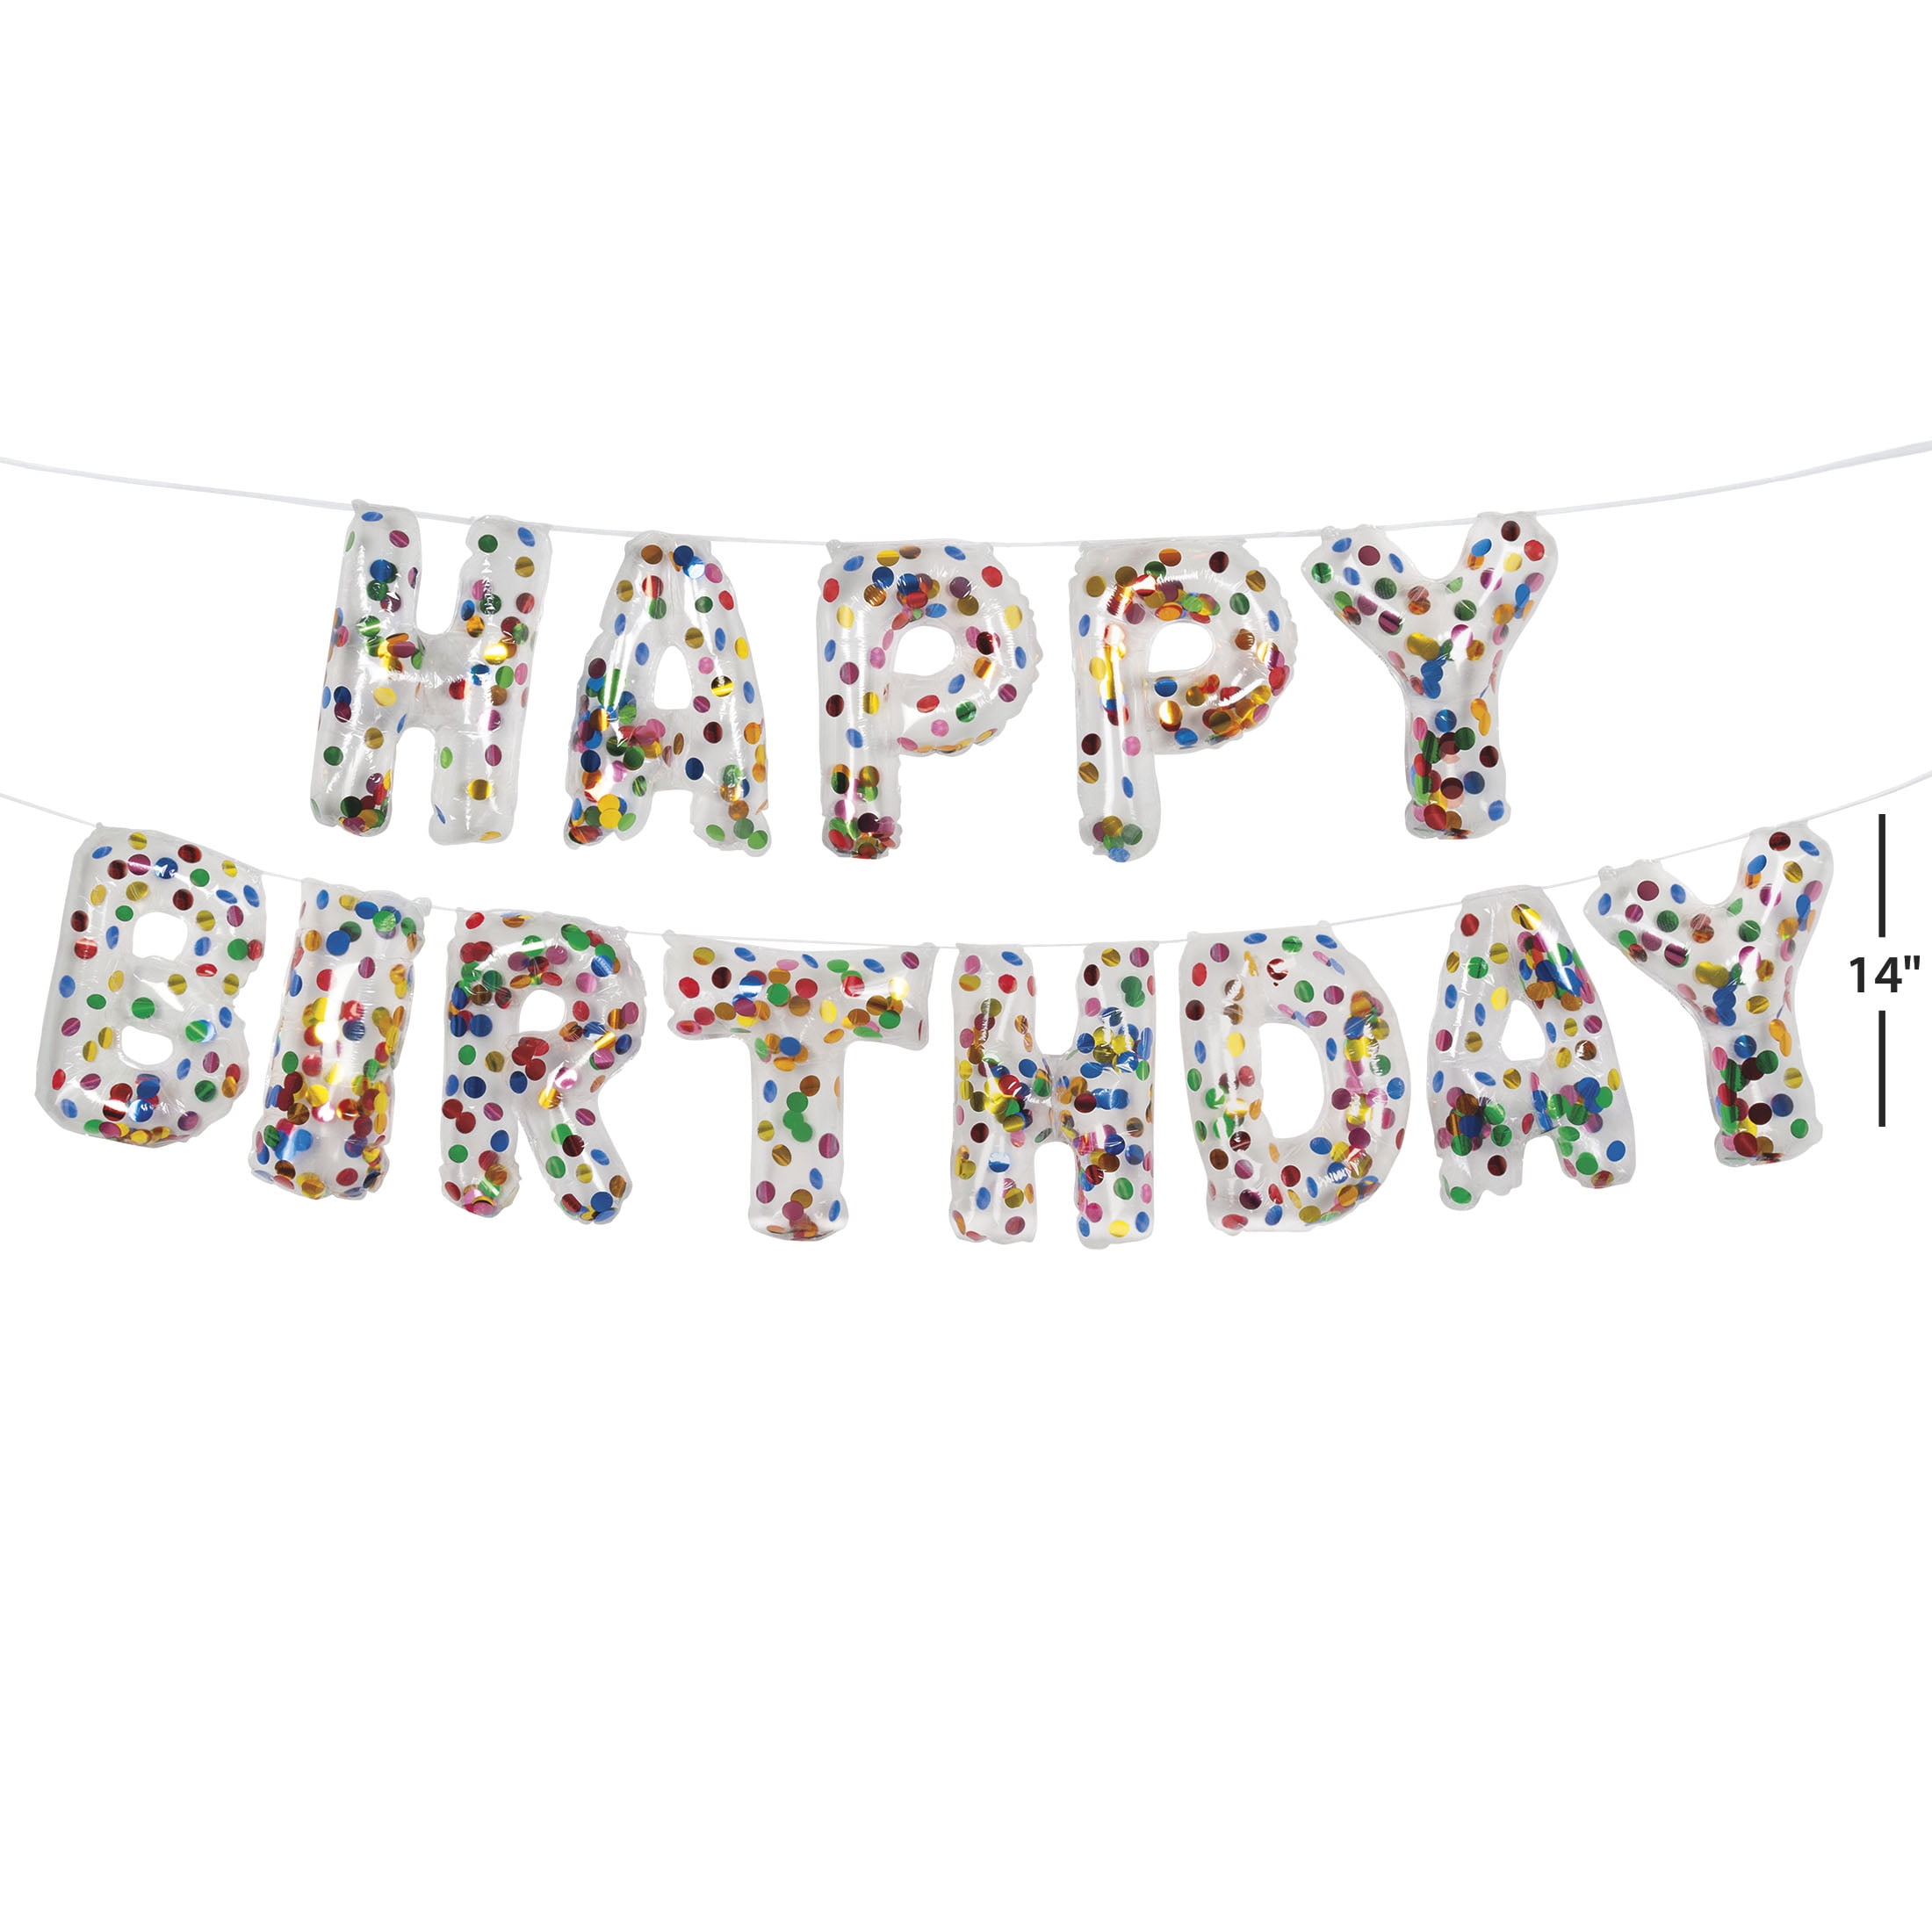 11Q Assorted Happy Birthday Streamers and Stars (50 count)